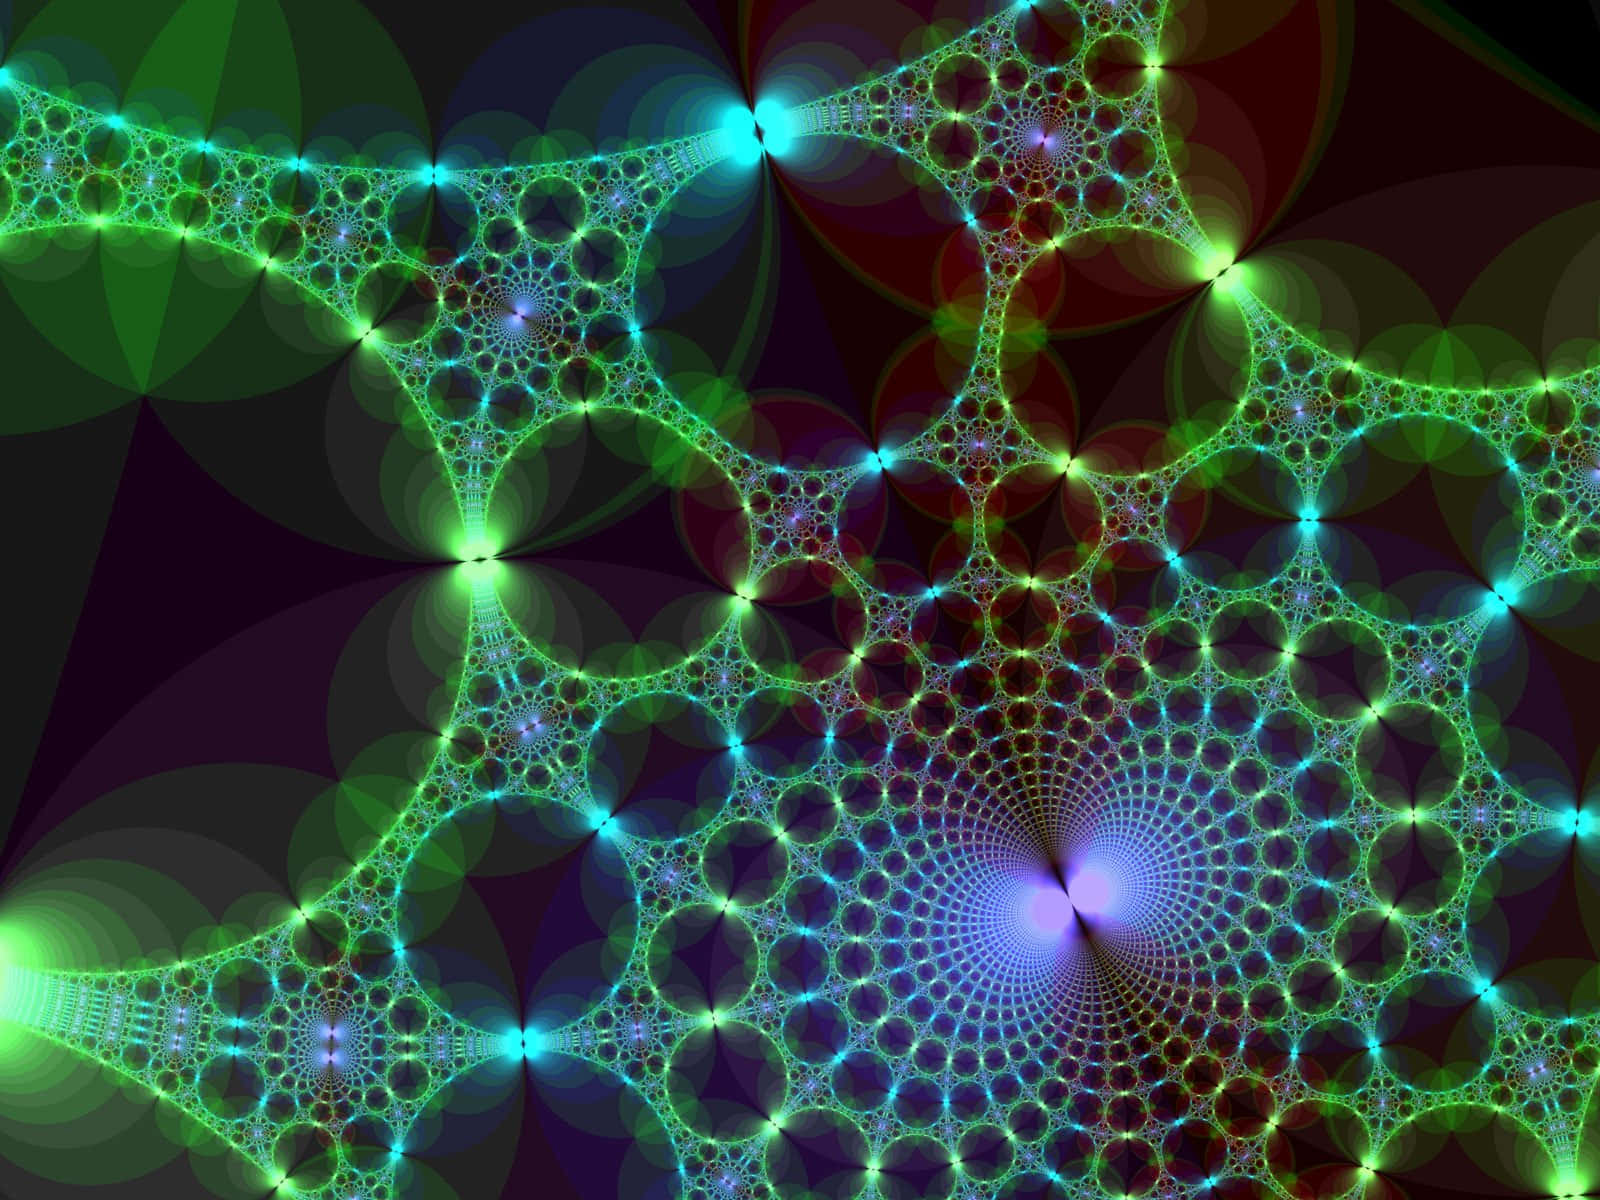 Captivating Fractal Art: Interconnected Psychedelic Patterns Wallpaper